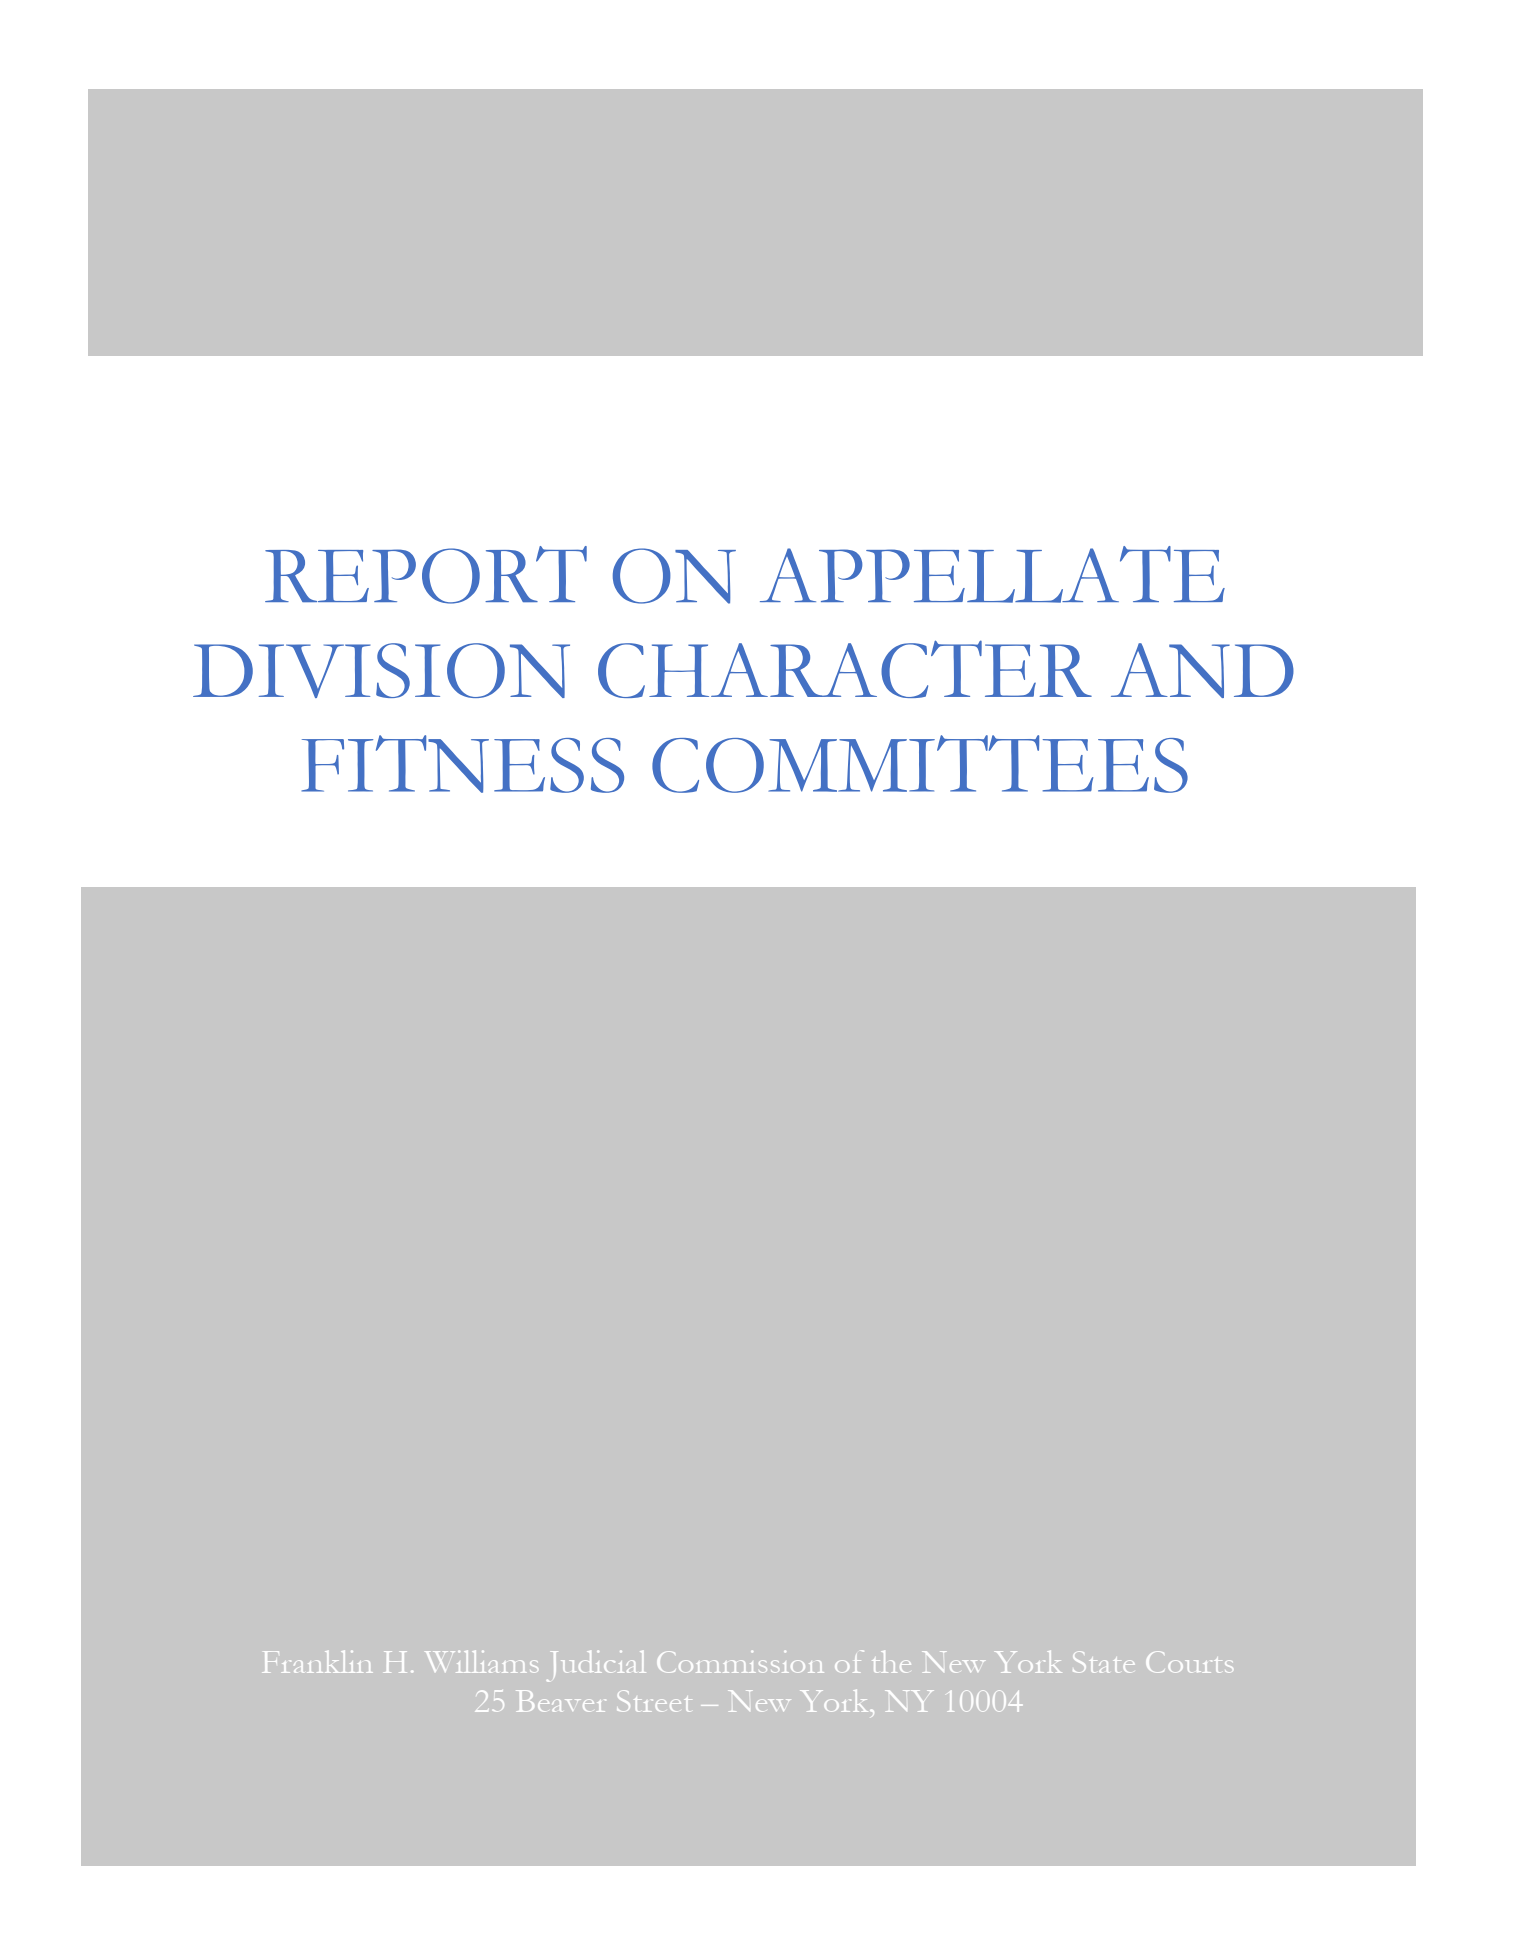 Report on Appellate Division Character and Fitness Committees